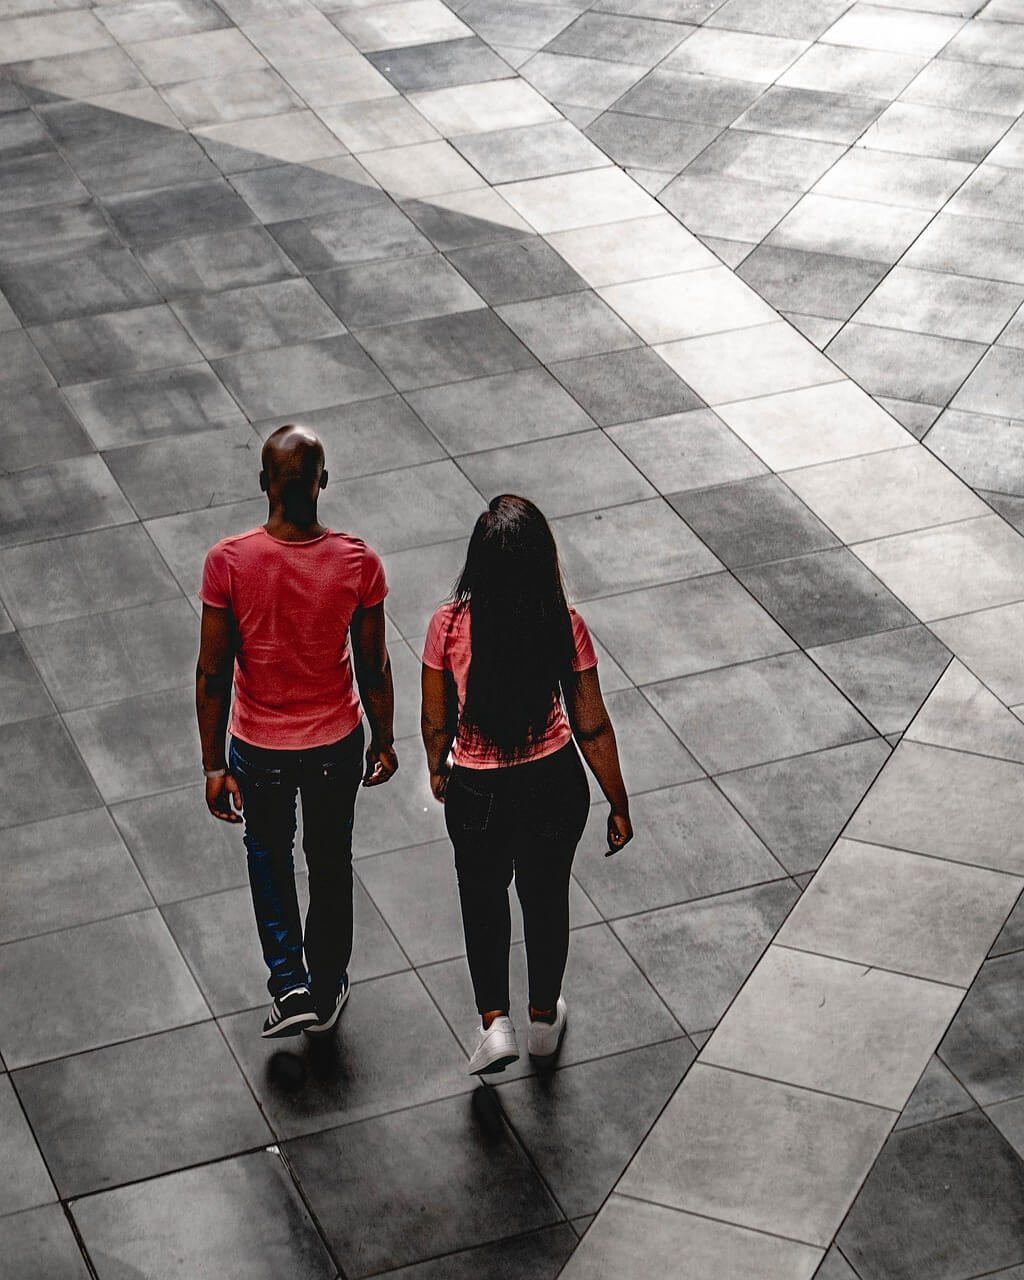 Two people walking on a tiled floor holding hands